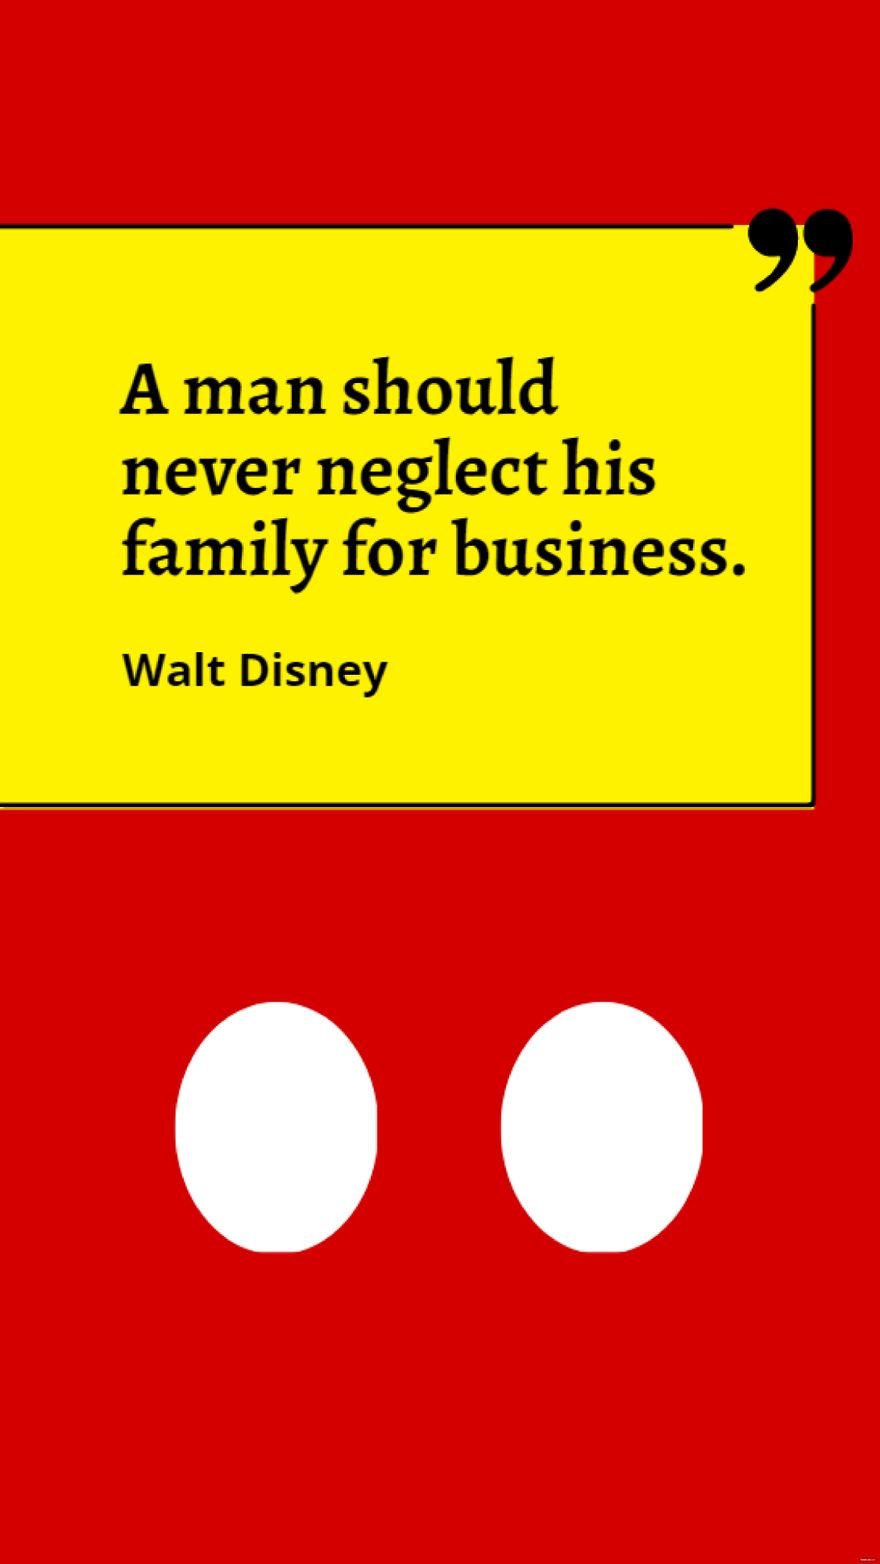 Free Walt Disney - A man should never neglect his family for business.